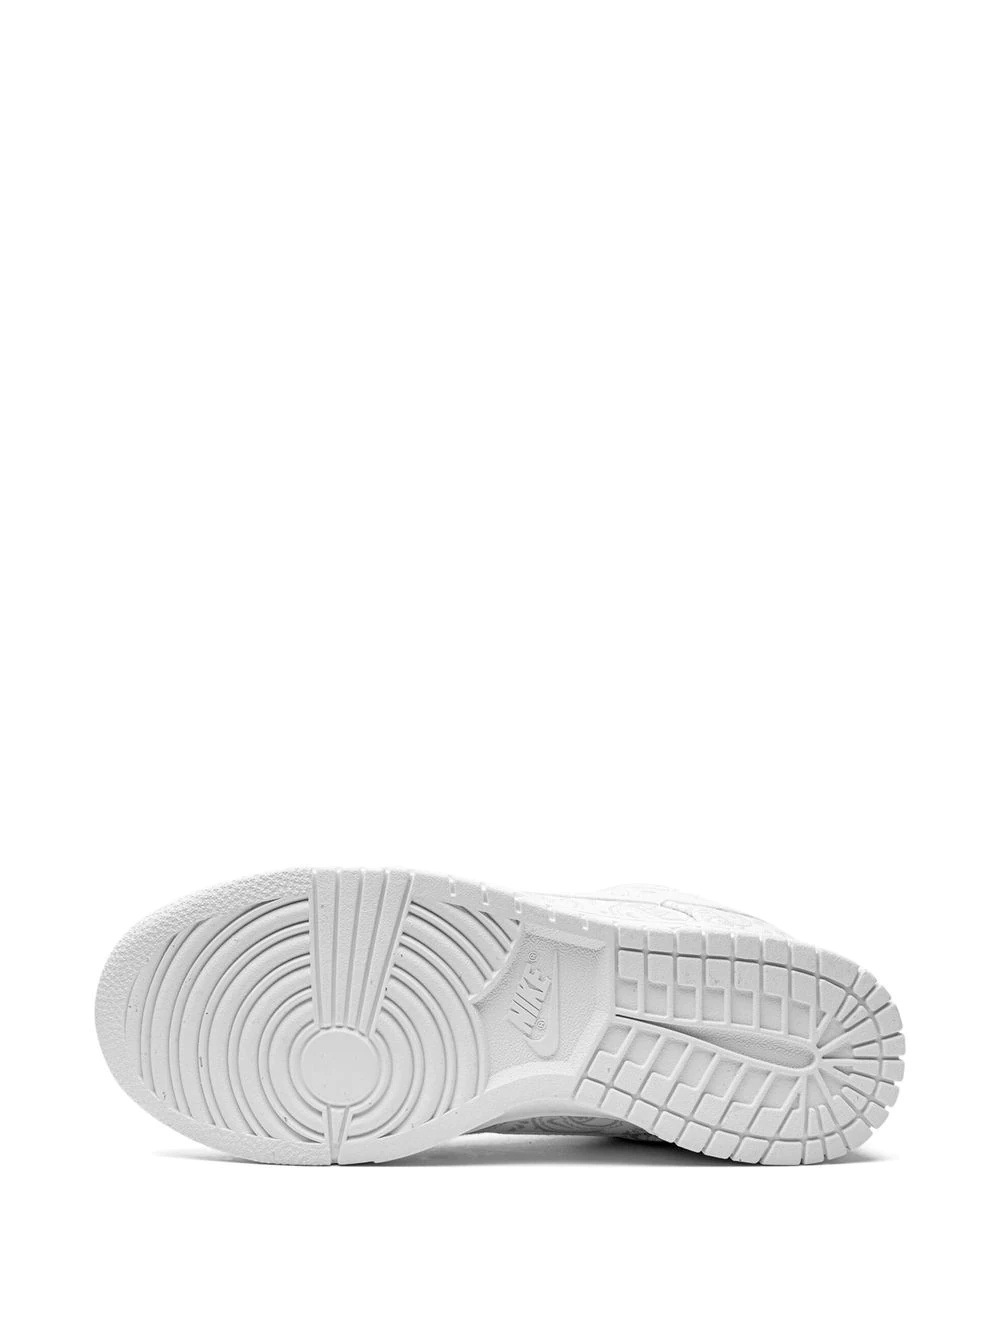 Dunk Low "White Paisley" sneakers - 4